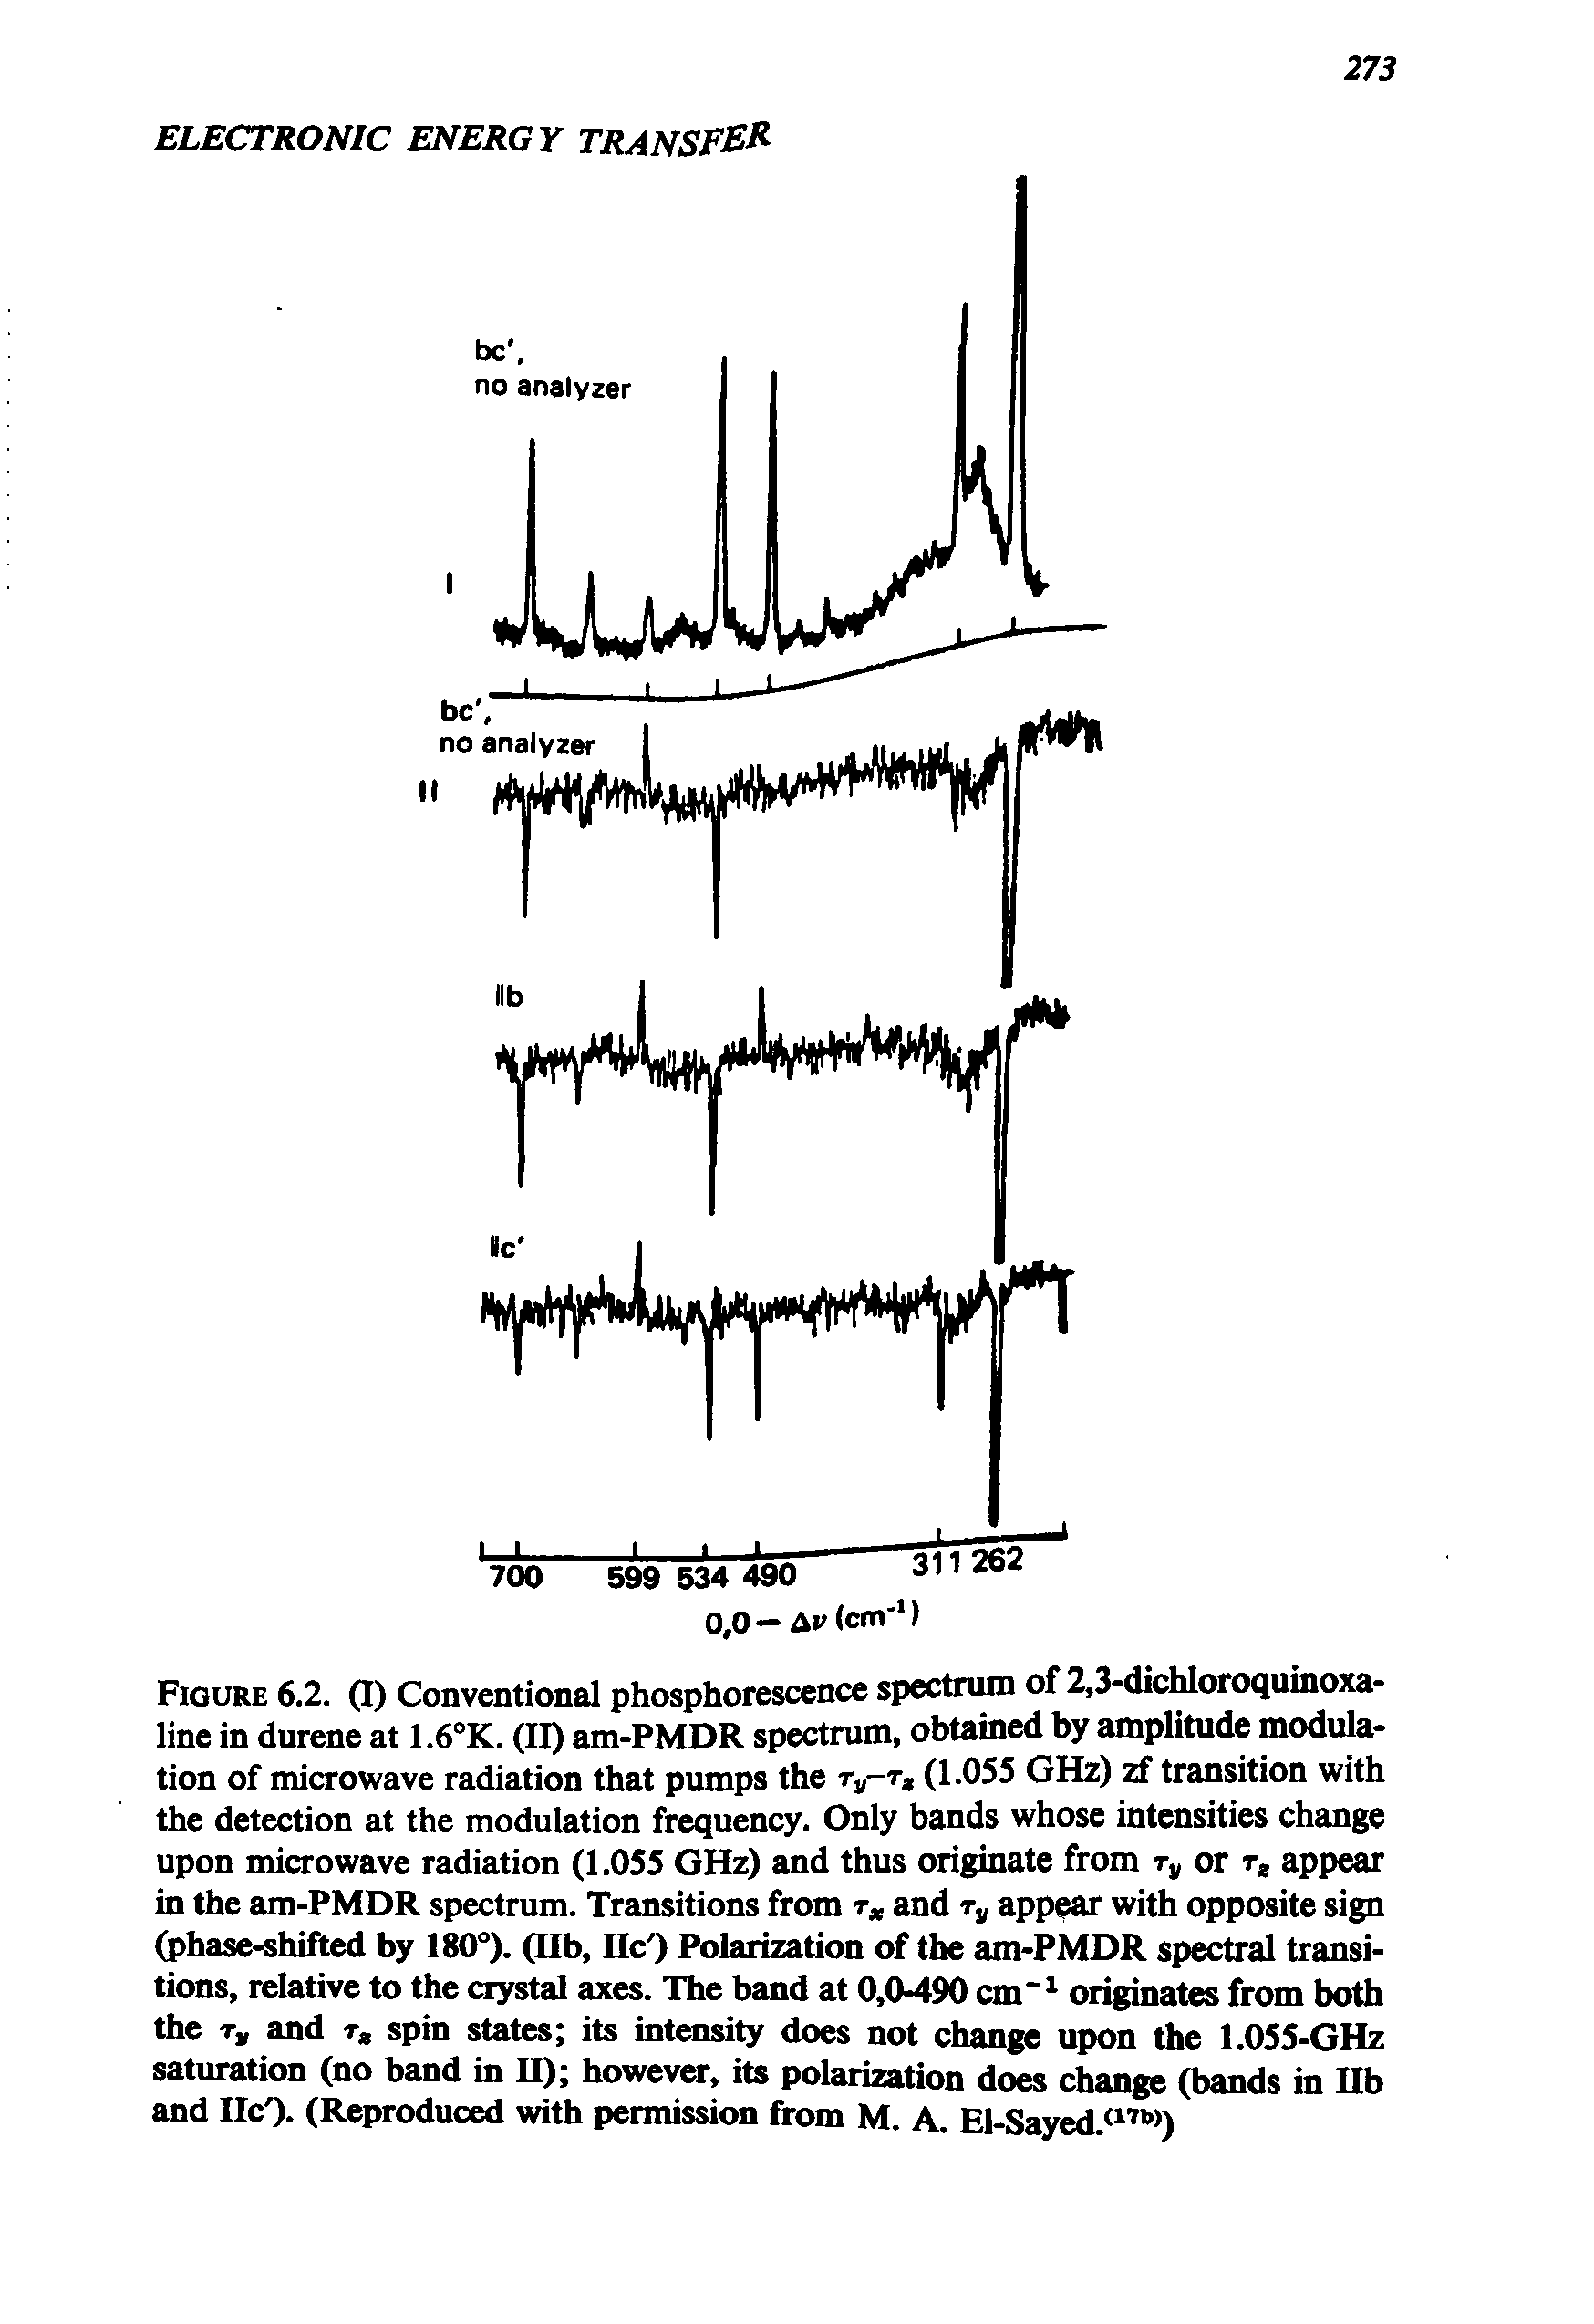 Figure 6.2. (I) Conventional phosphorescence spectrum of 2,3-dichloroquinoxa-line in durene at 1.6°K. (II) am-PMDR spectrum, obtained by amplitude modulation of microwave radiation that pumps the tv-t, (1.055 GHz) zf transition with the detection at the modulation frequency. Only bands whose intensities change upon microwave radiation (1.055 GHz) and thus originate from tv or rz appear in the am-PMDR spectrum. Transitions from r and rv appear with opposite sign (phase-shifted by 180°). (Hb, lie ) Polarization of the am-PMDR spectral transitions, relative to the crystal axes. The band at 0,0-490 cm-1 originates from both the r and t spin states its intensity does not change upon the 1.055-GHz saturation (no band in II) however, its polarization does rhanp. (bands in Hb and IIc ). (Reproduced with permission from M. A. El-Sayed.tt7W)...